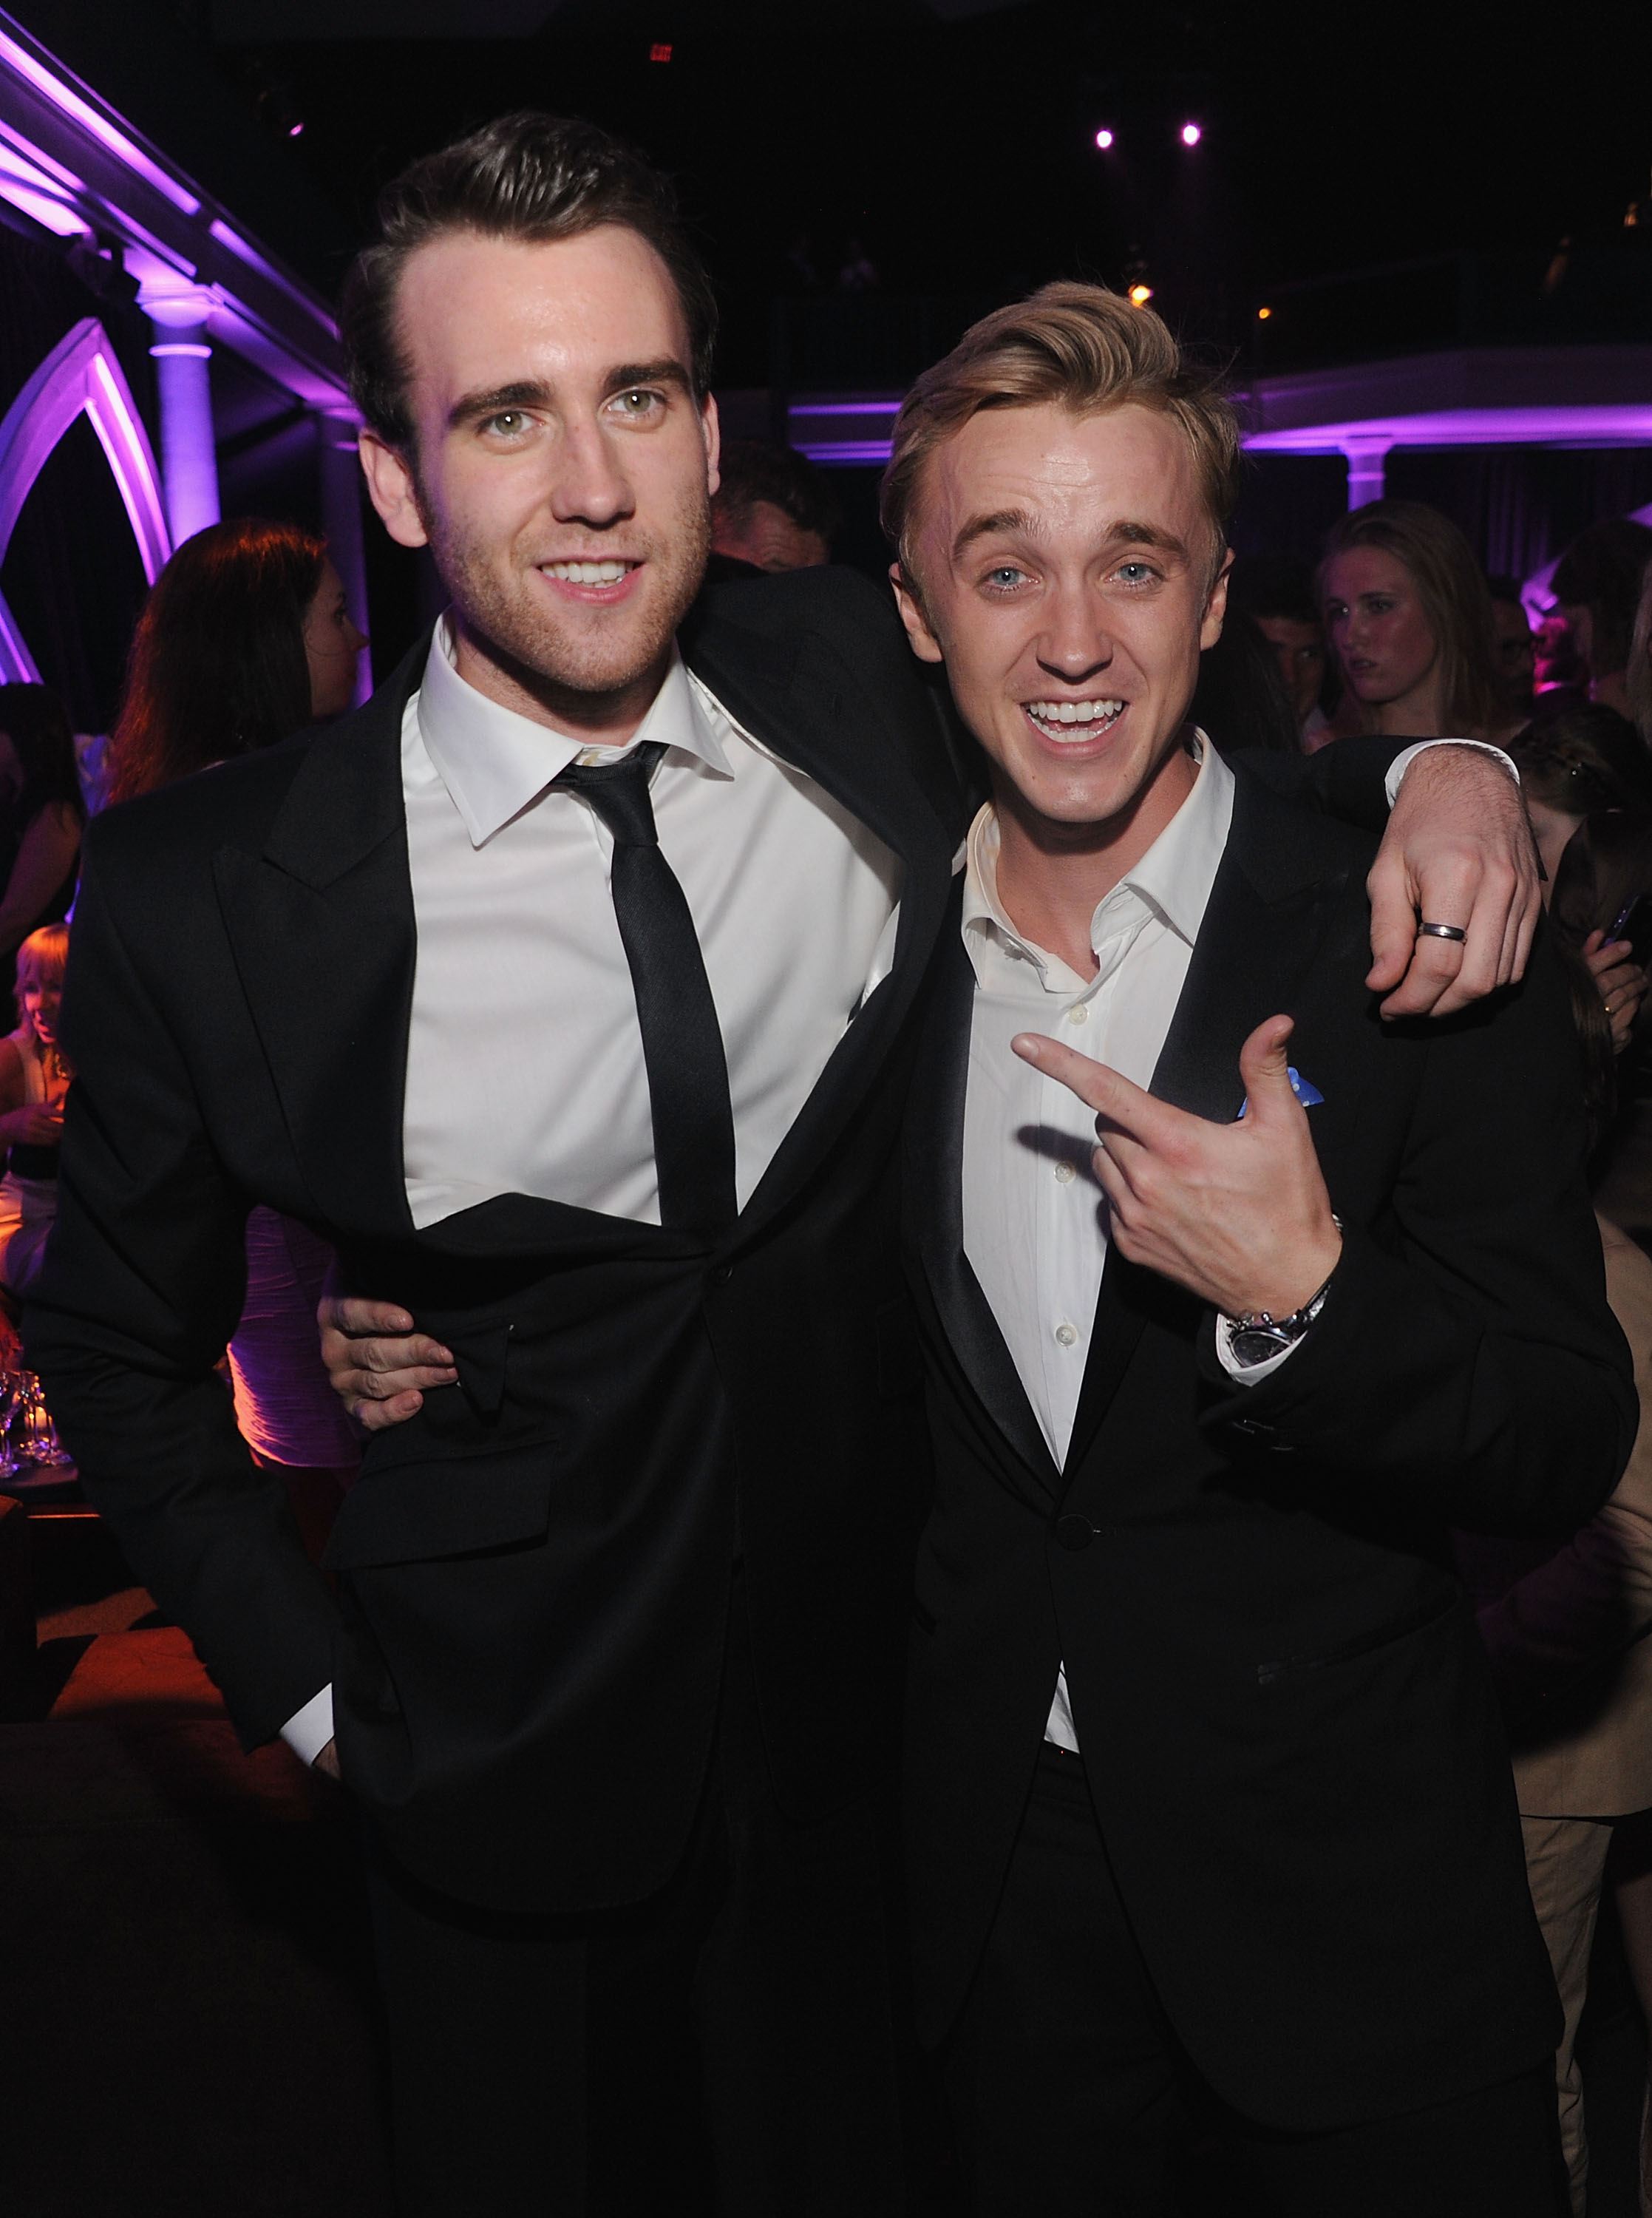 Matthew Lewis and Tom Felton at the after party for the premiere of "Harry Potter and the Deathly Hallows: Part 2" in New York City on July 11, 2011.